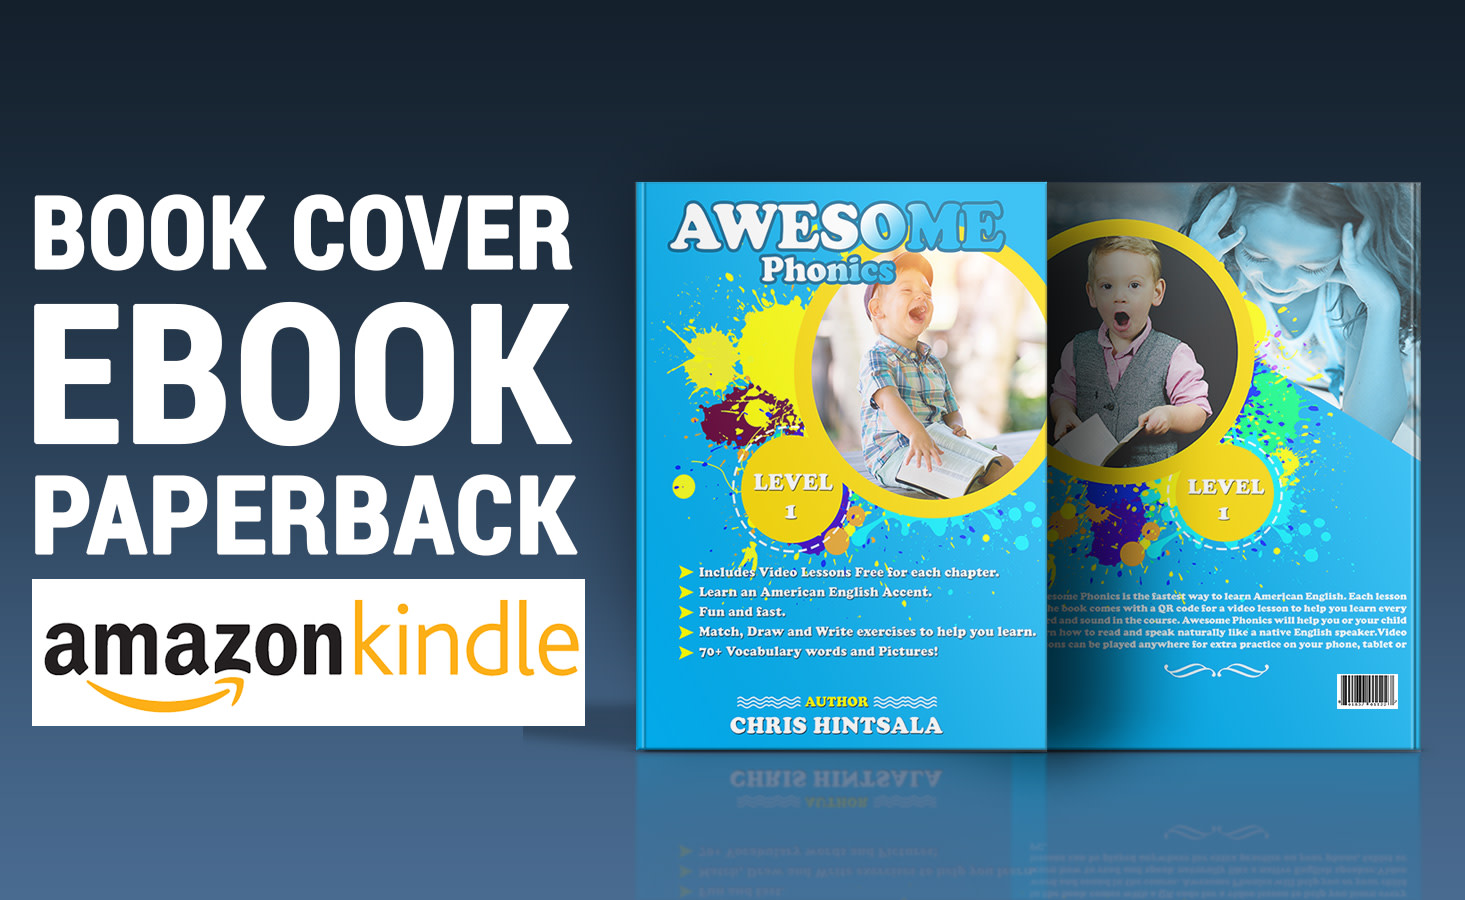 Design amazon kindle book cover, ebook or paperback cover by Eaminraj |  Fiverr